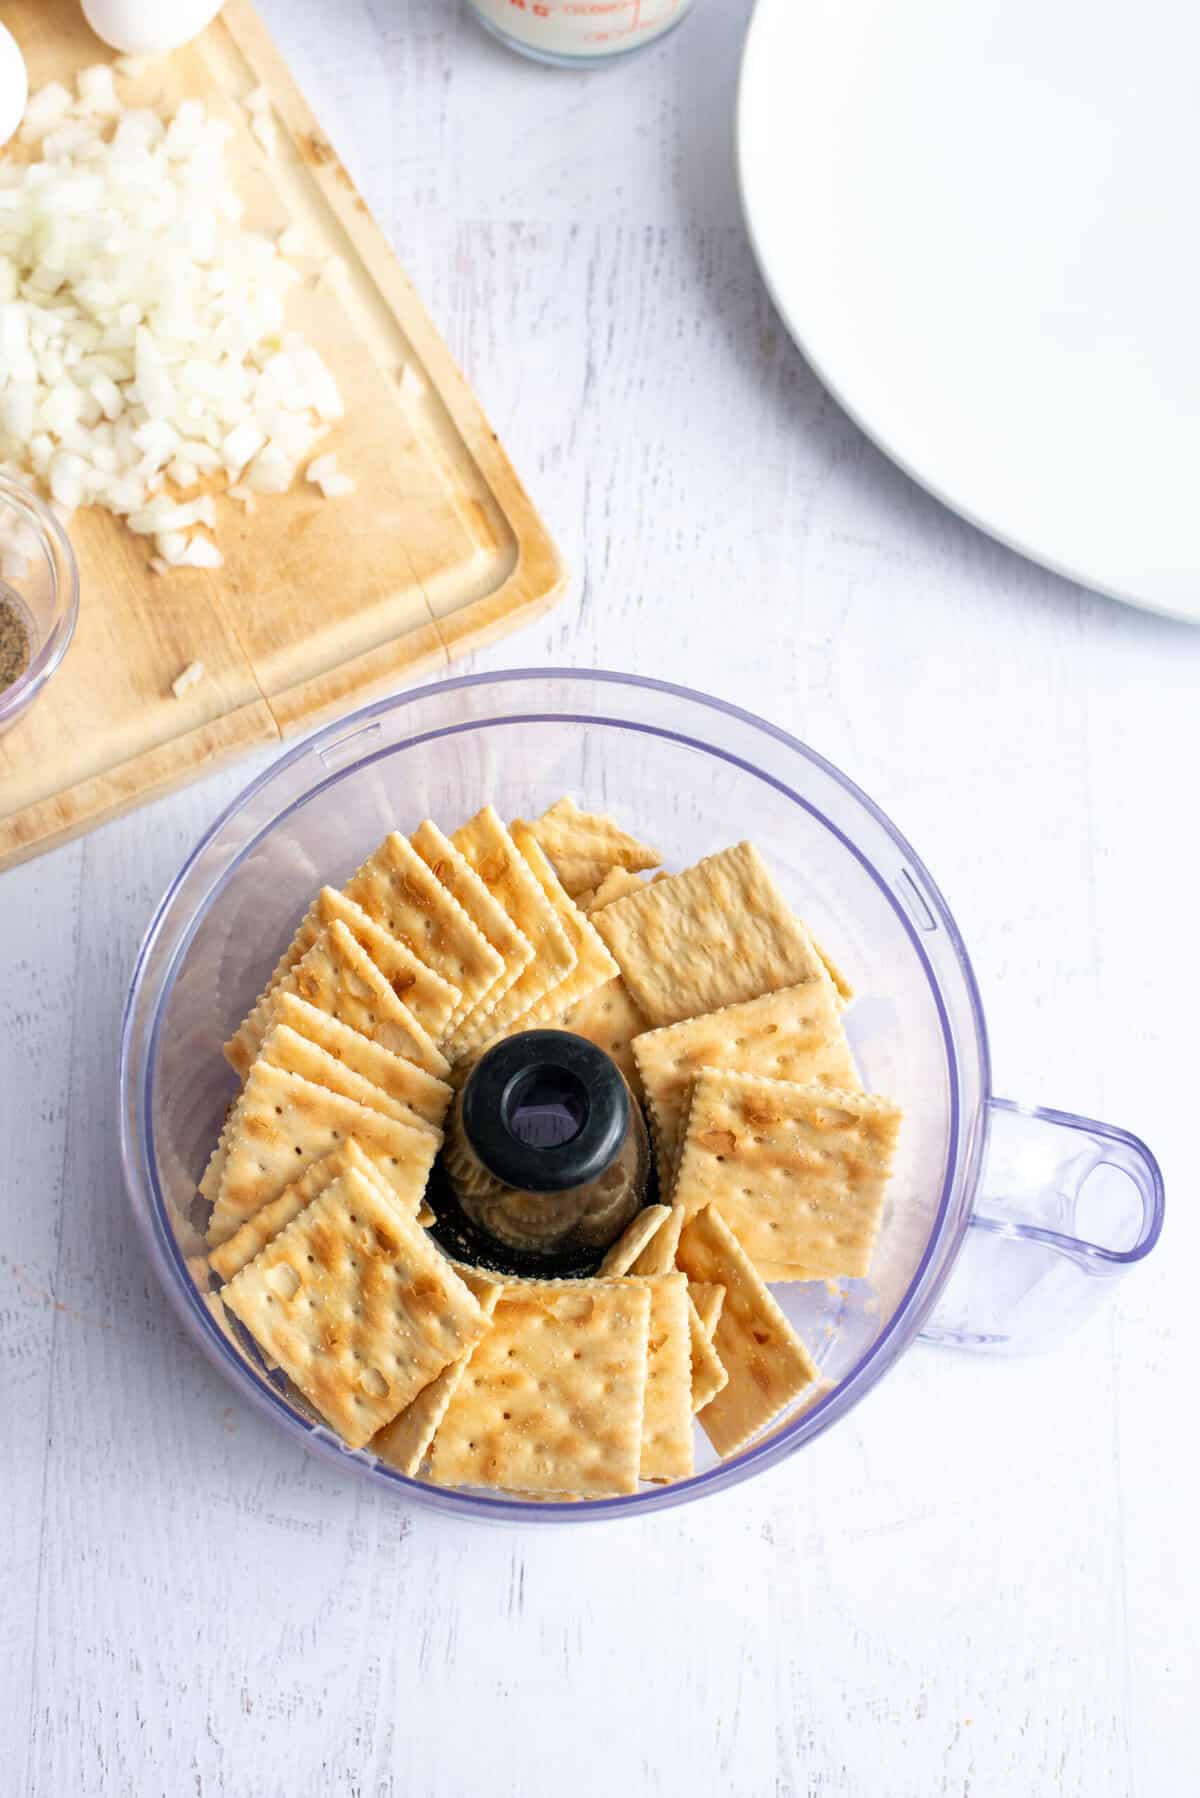 place saltines in a plastic bag or food processor